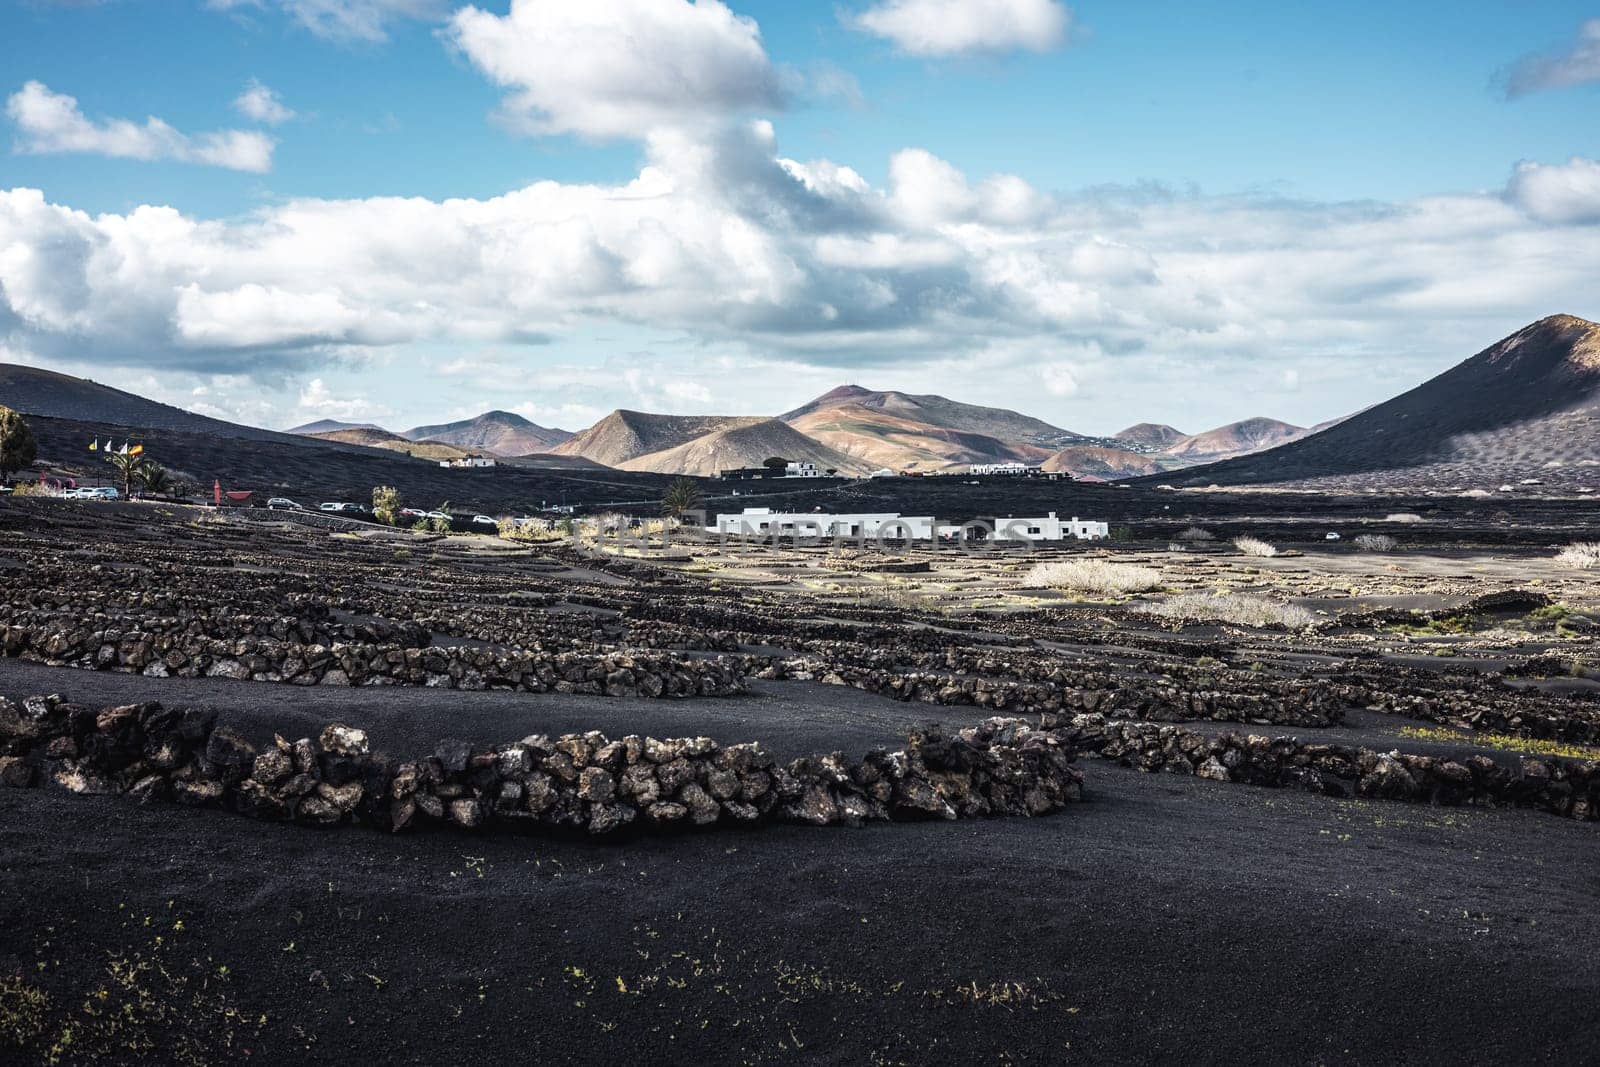 Traditional white houses in black volcanic landscape of La Geria wine growing region with view of Timanfaya National Park in Lanzarote. Touristic attraction in Lanzarote island, Canary Islands, Spain. by kasto